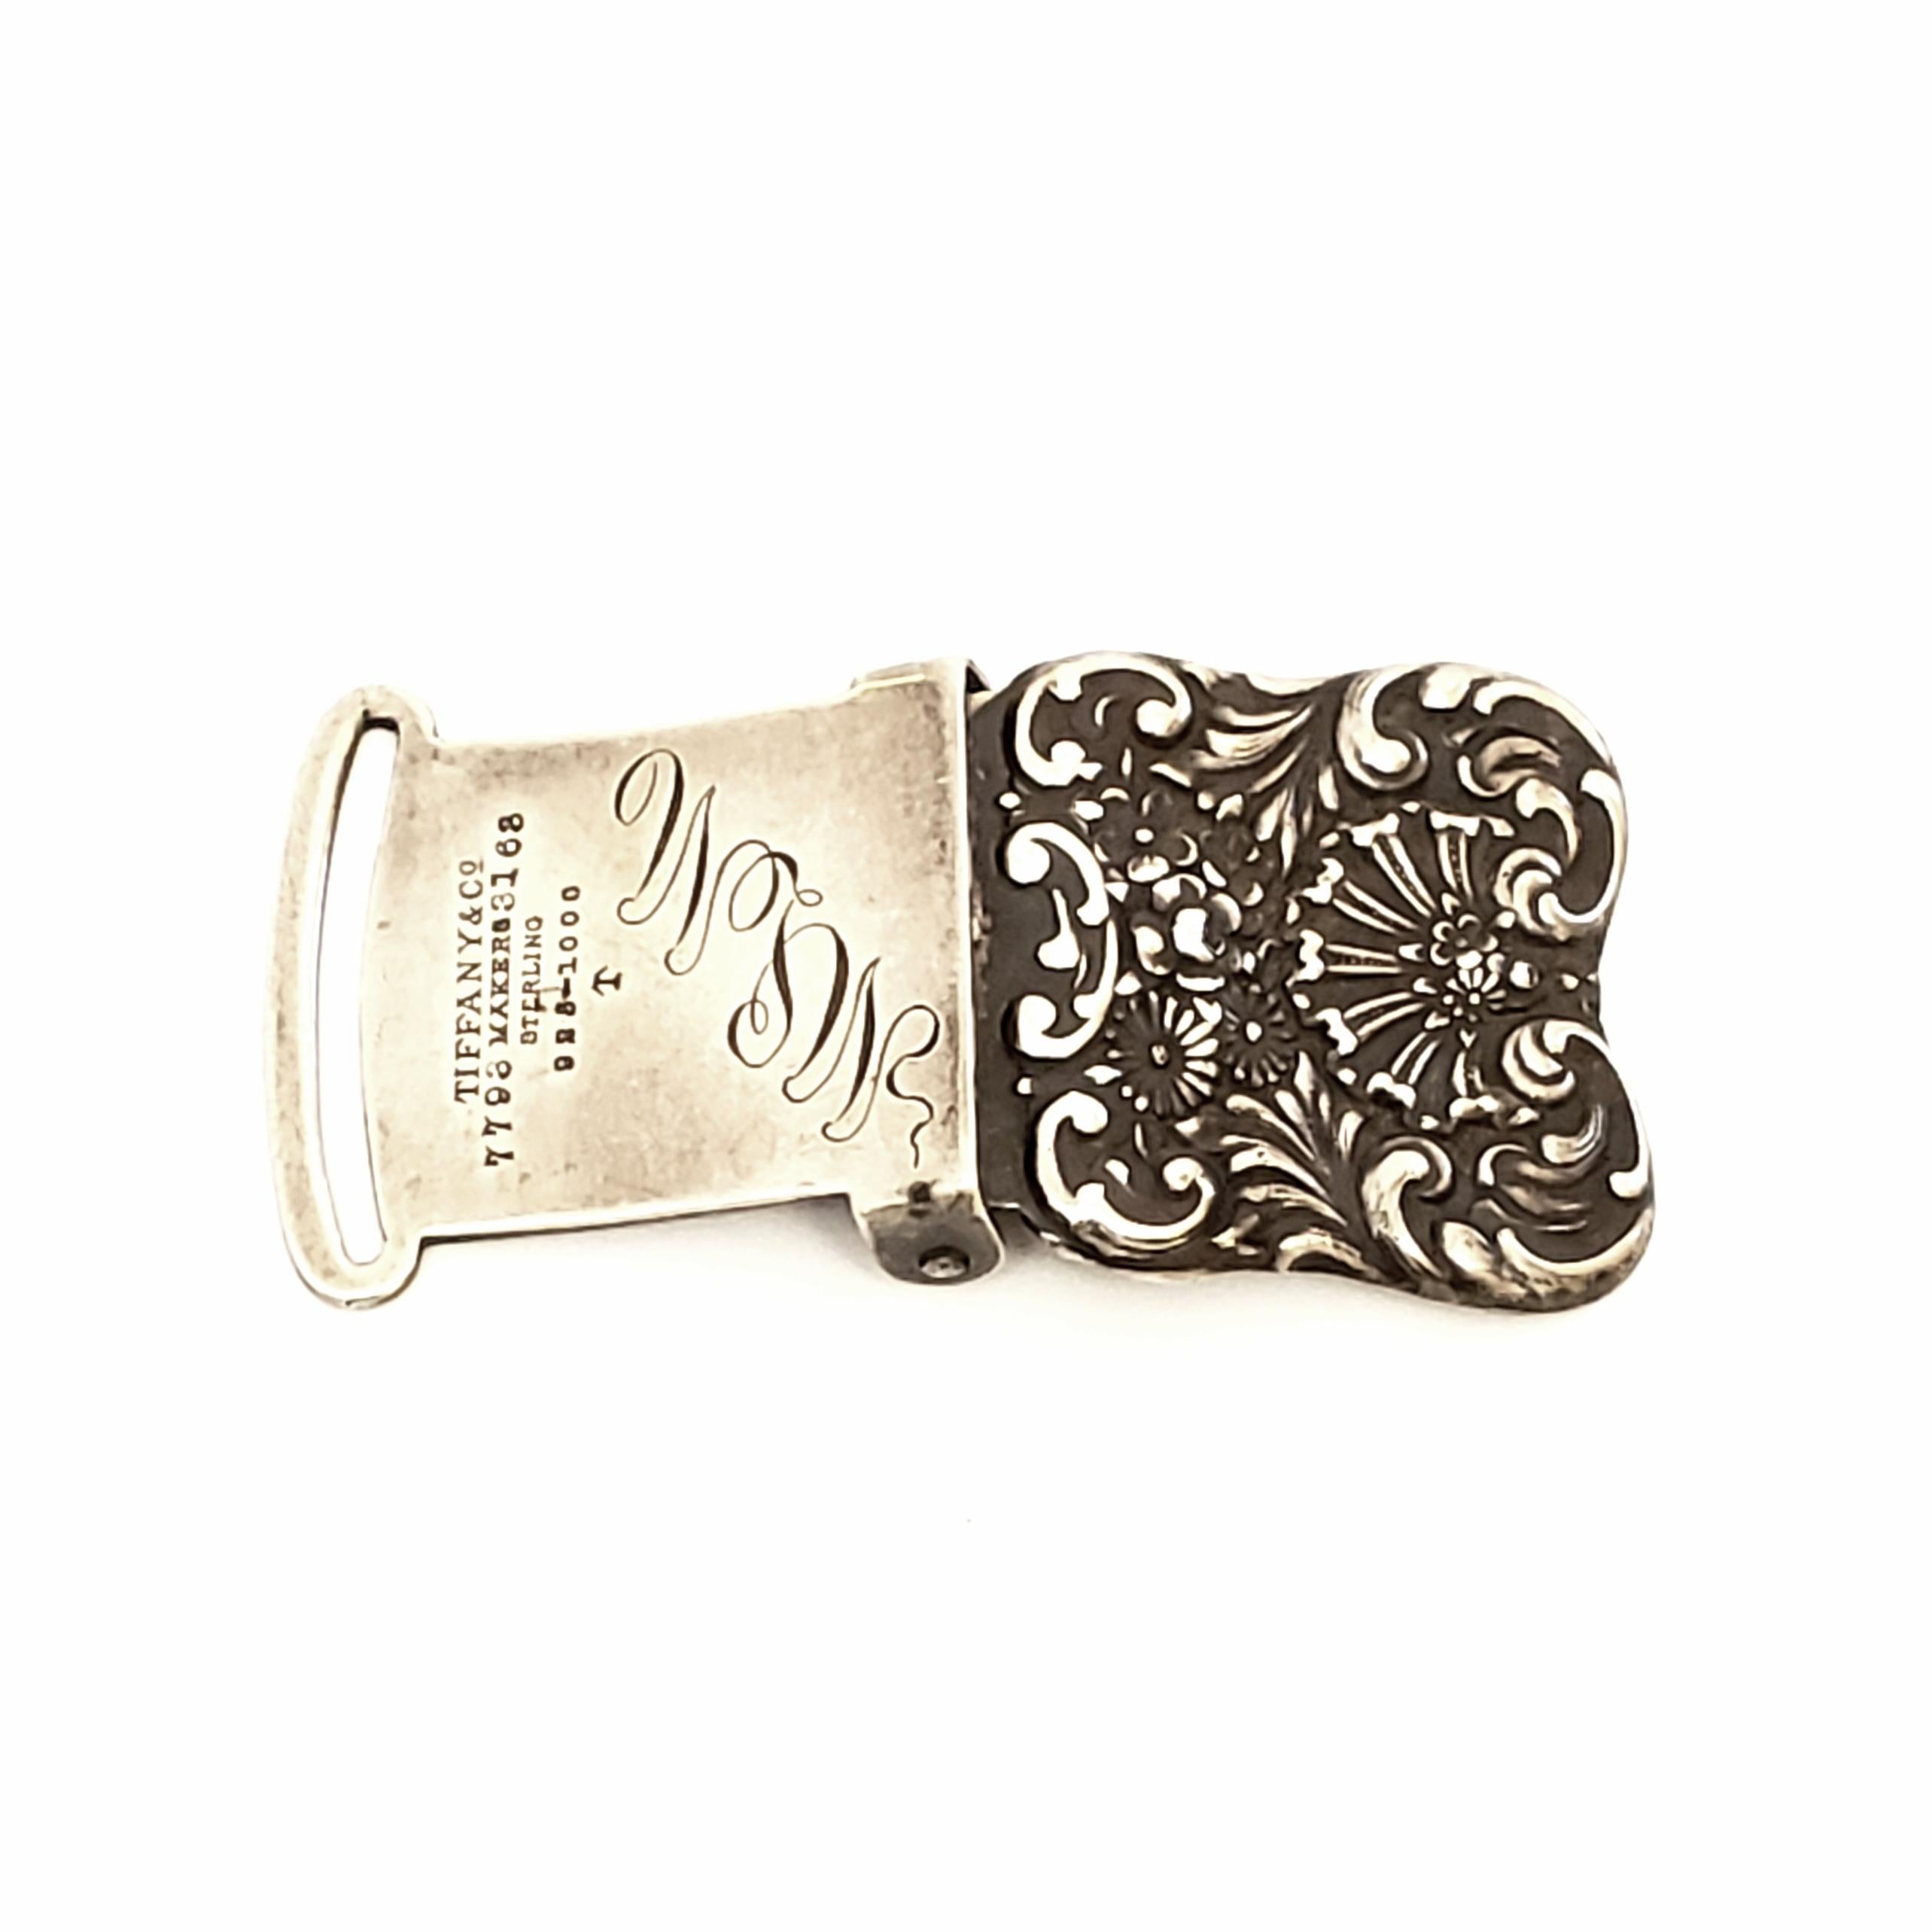 Small square sterling silver sash/belt buckle by Tiffany & Co, circa 1892-1902.

Beautiful chased and respousse design with floral and scroll patterns. Made under the directorship of Charles L. Tiffany. 

Monogram appears to be MLM

Measures 1 1/8